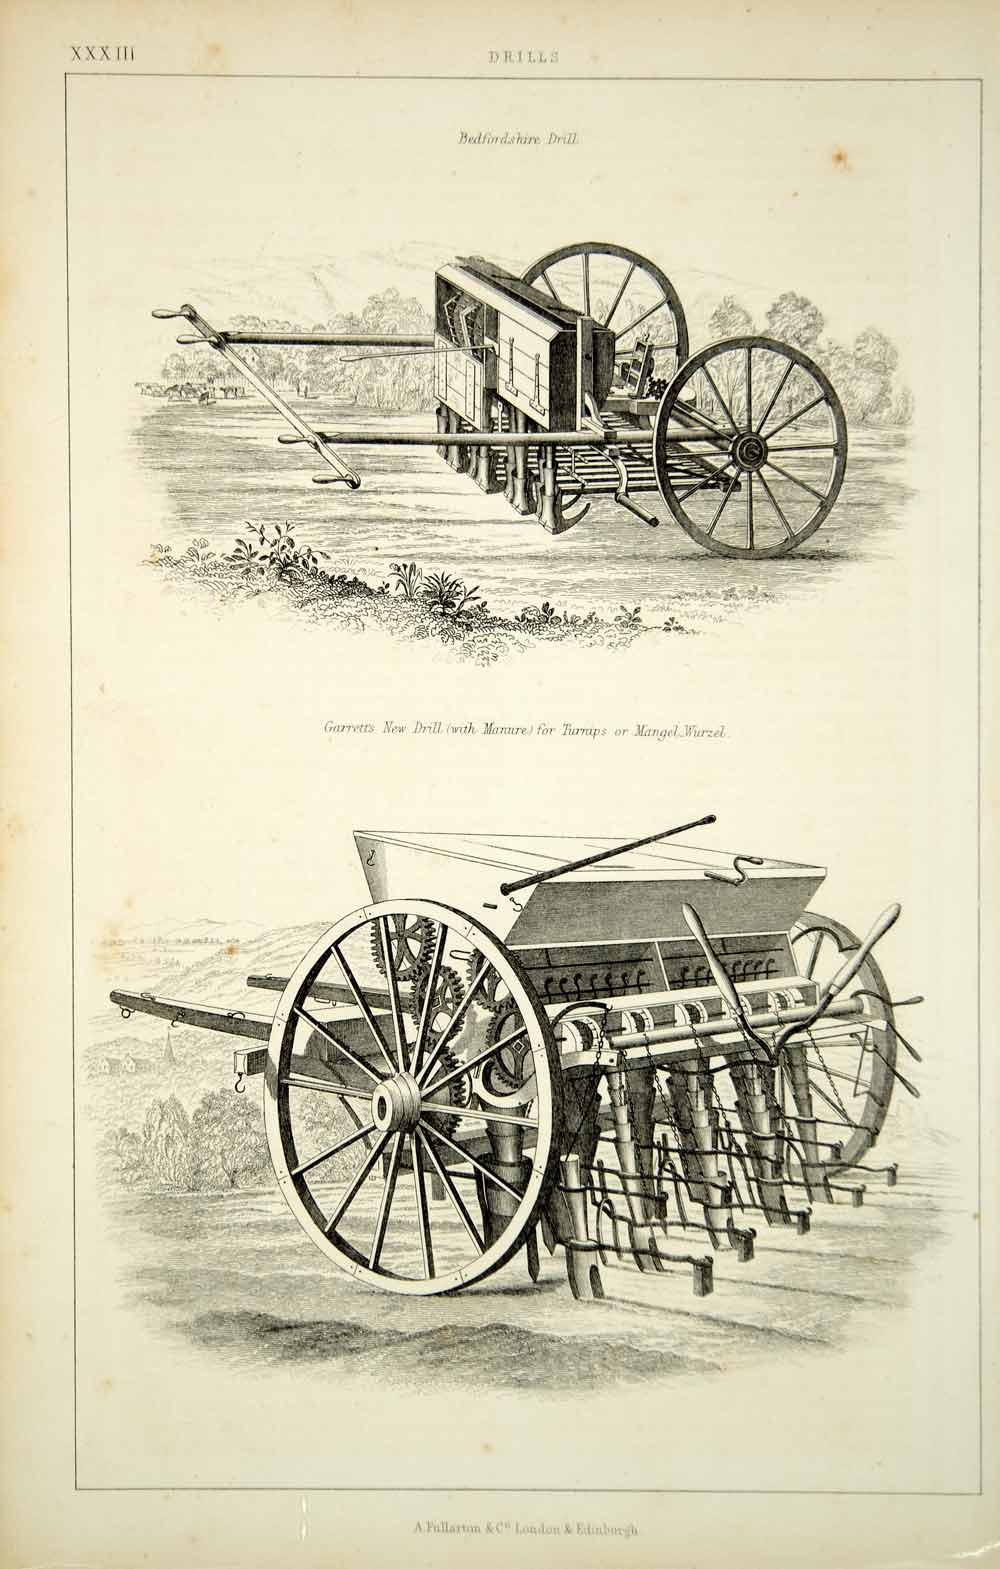 1852 Steel Engraving Antique Seed Drill Sowing Farm Equipment Agriculture FD1